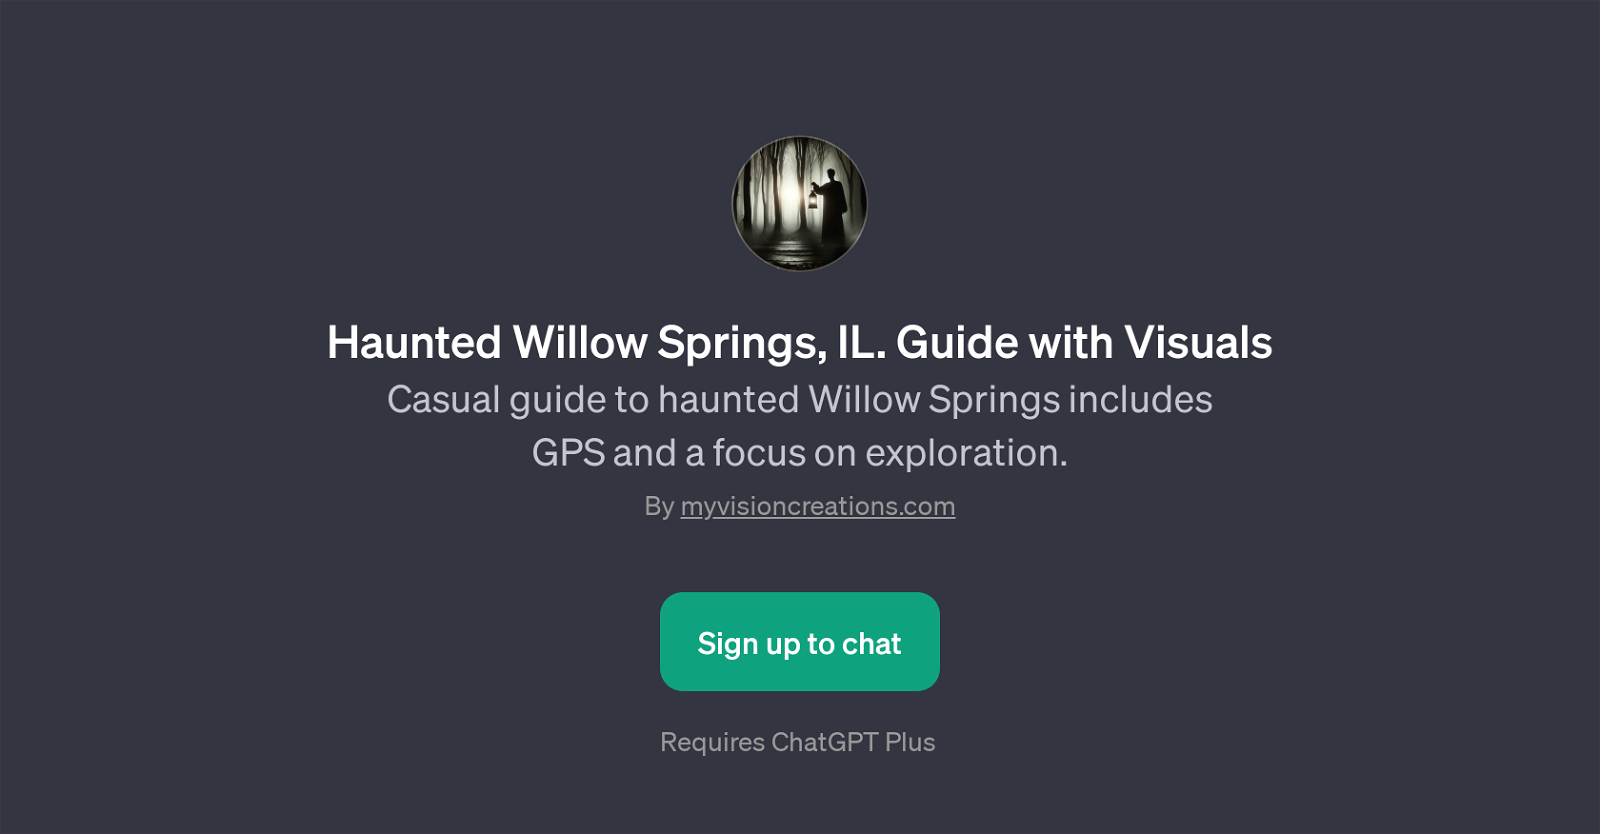 Haunted Willow Springs, IL. Guide with Visuals website